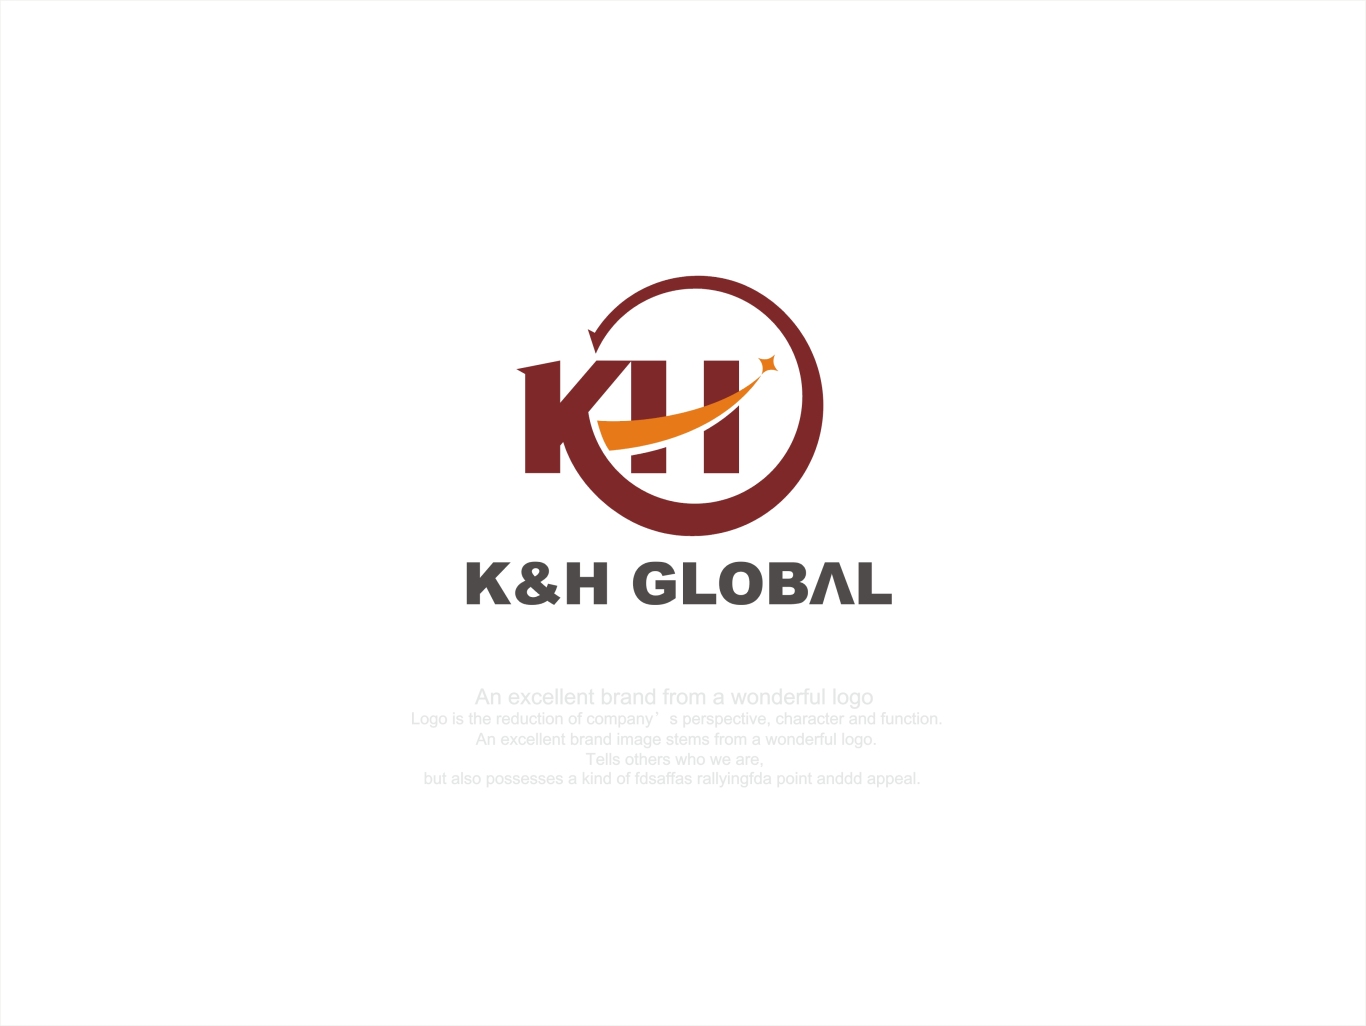 K&H GLOBAL 标志设计图1